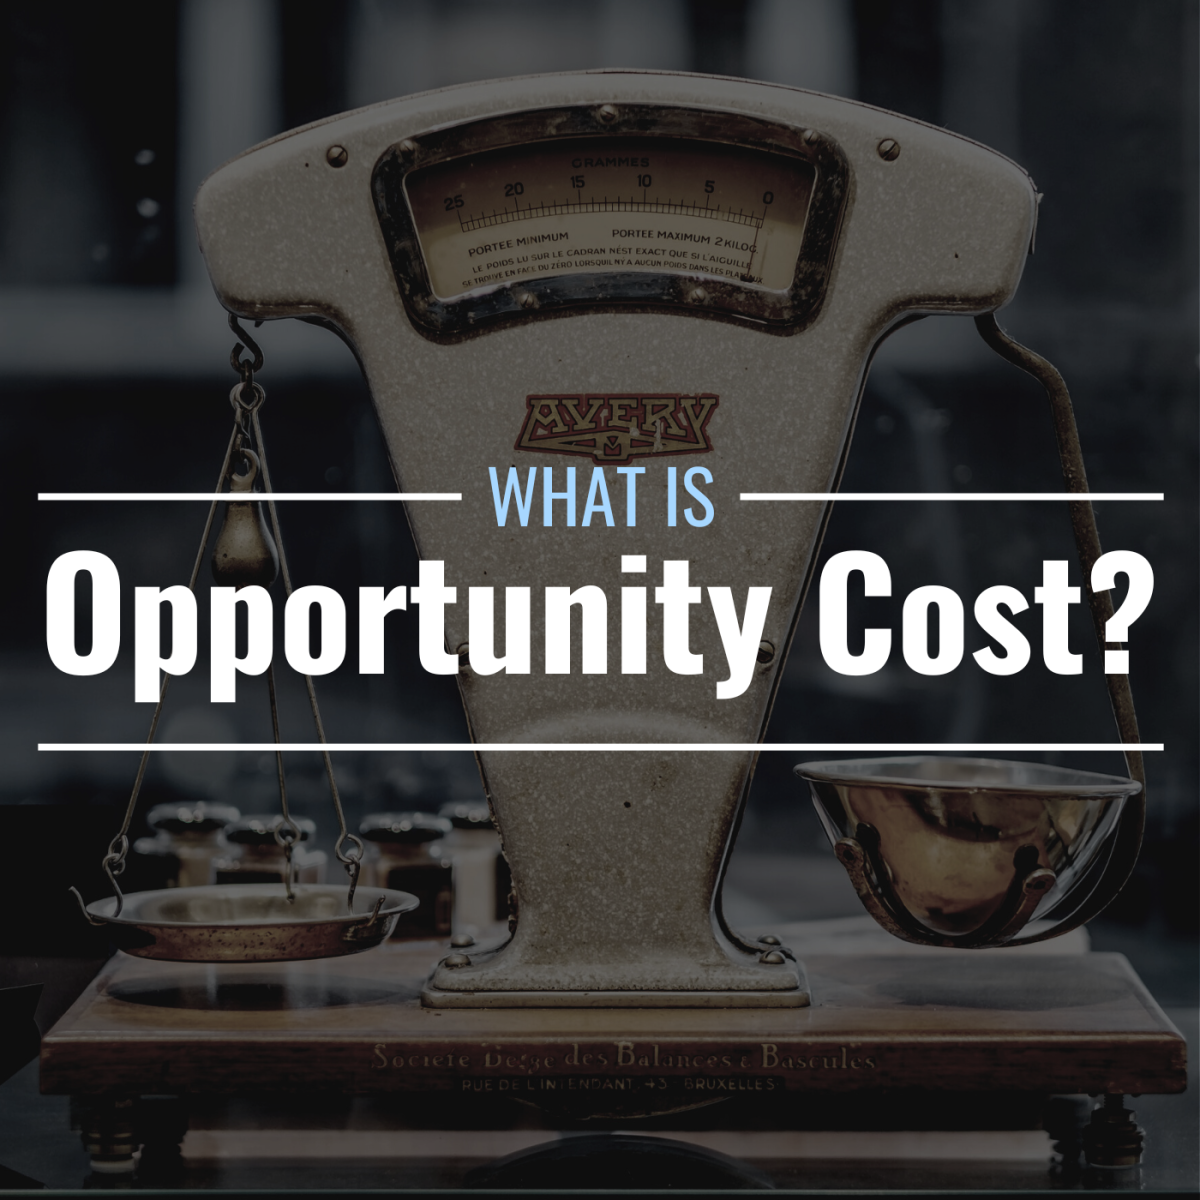 Darkened photo of an antique, 2-sided scale with text overlay that reads "What Is Opportunity Cost?"